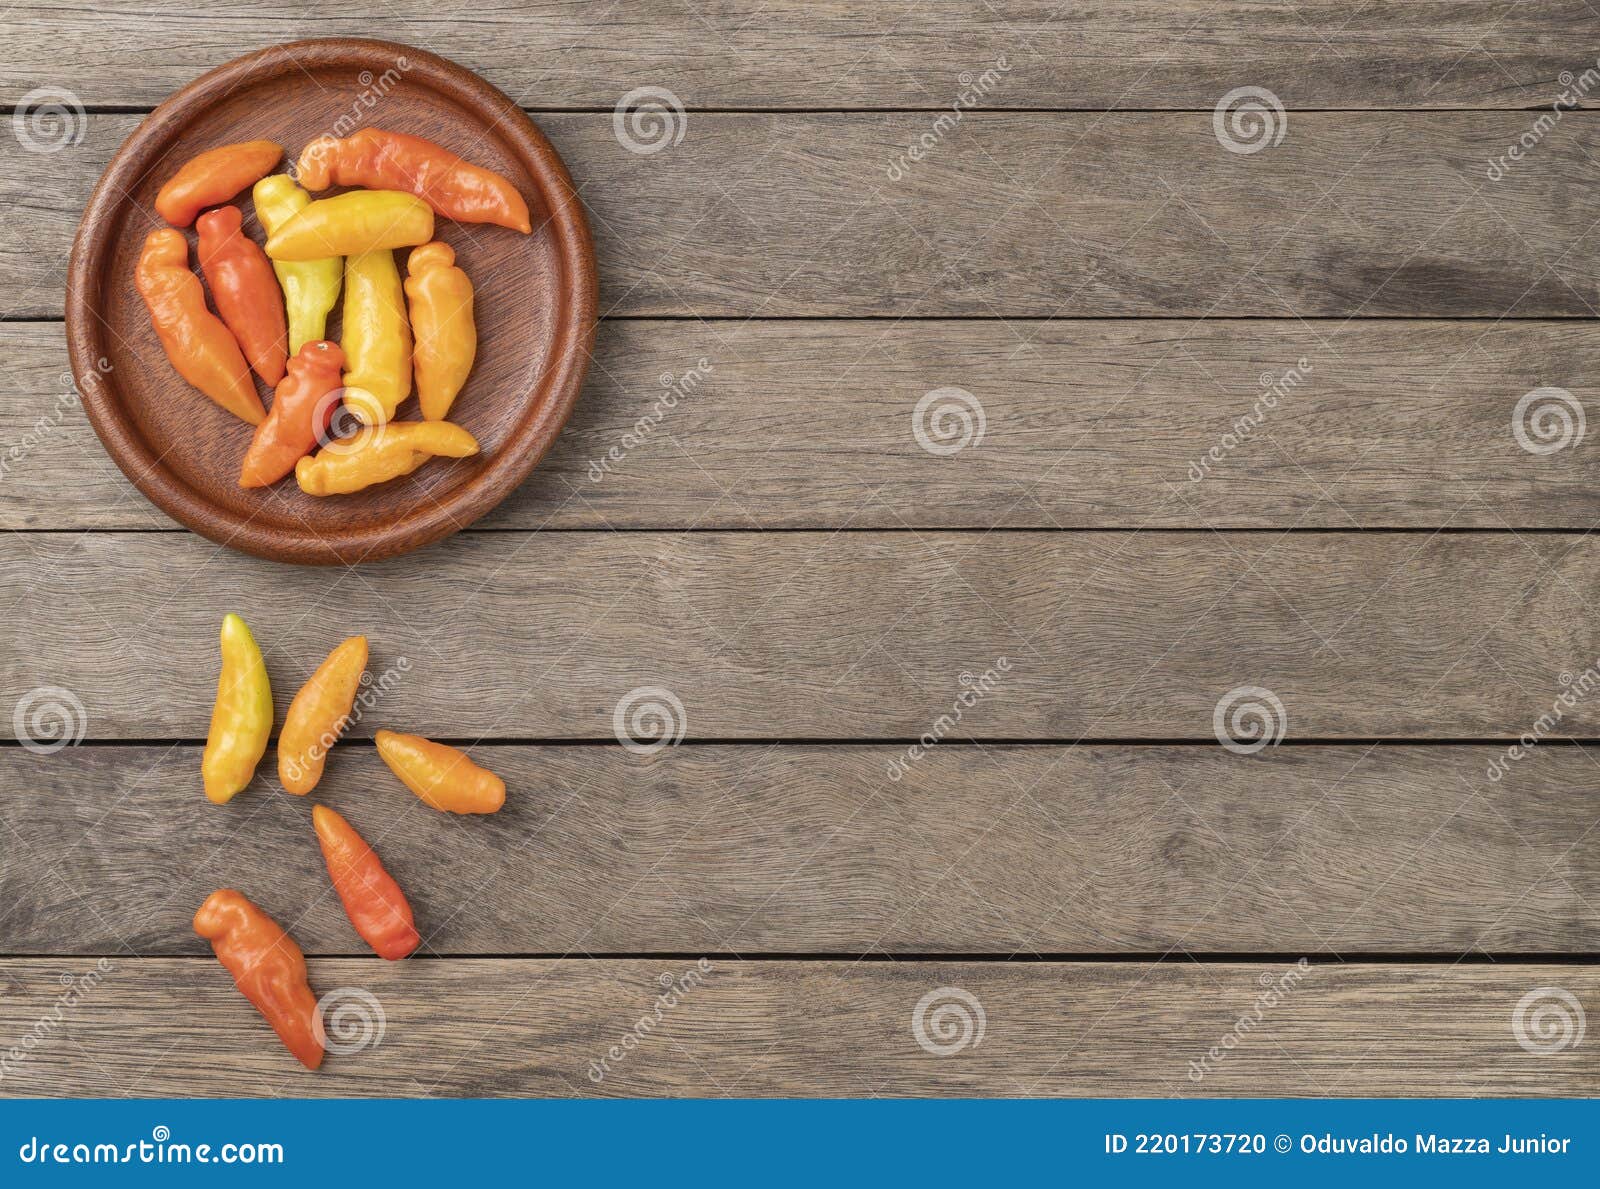 orange cheiro smell,scent peppers on a plate over wooden table with copy space